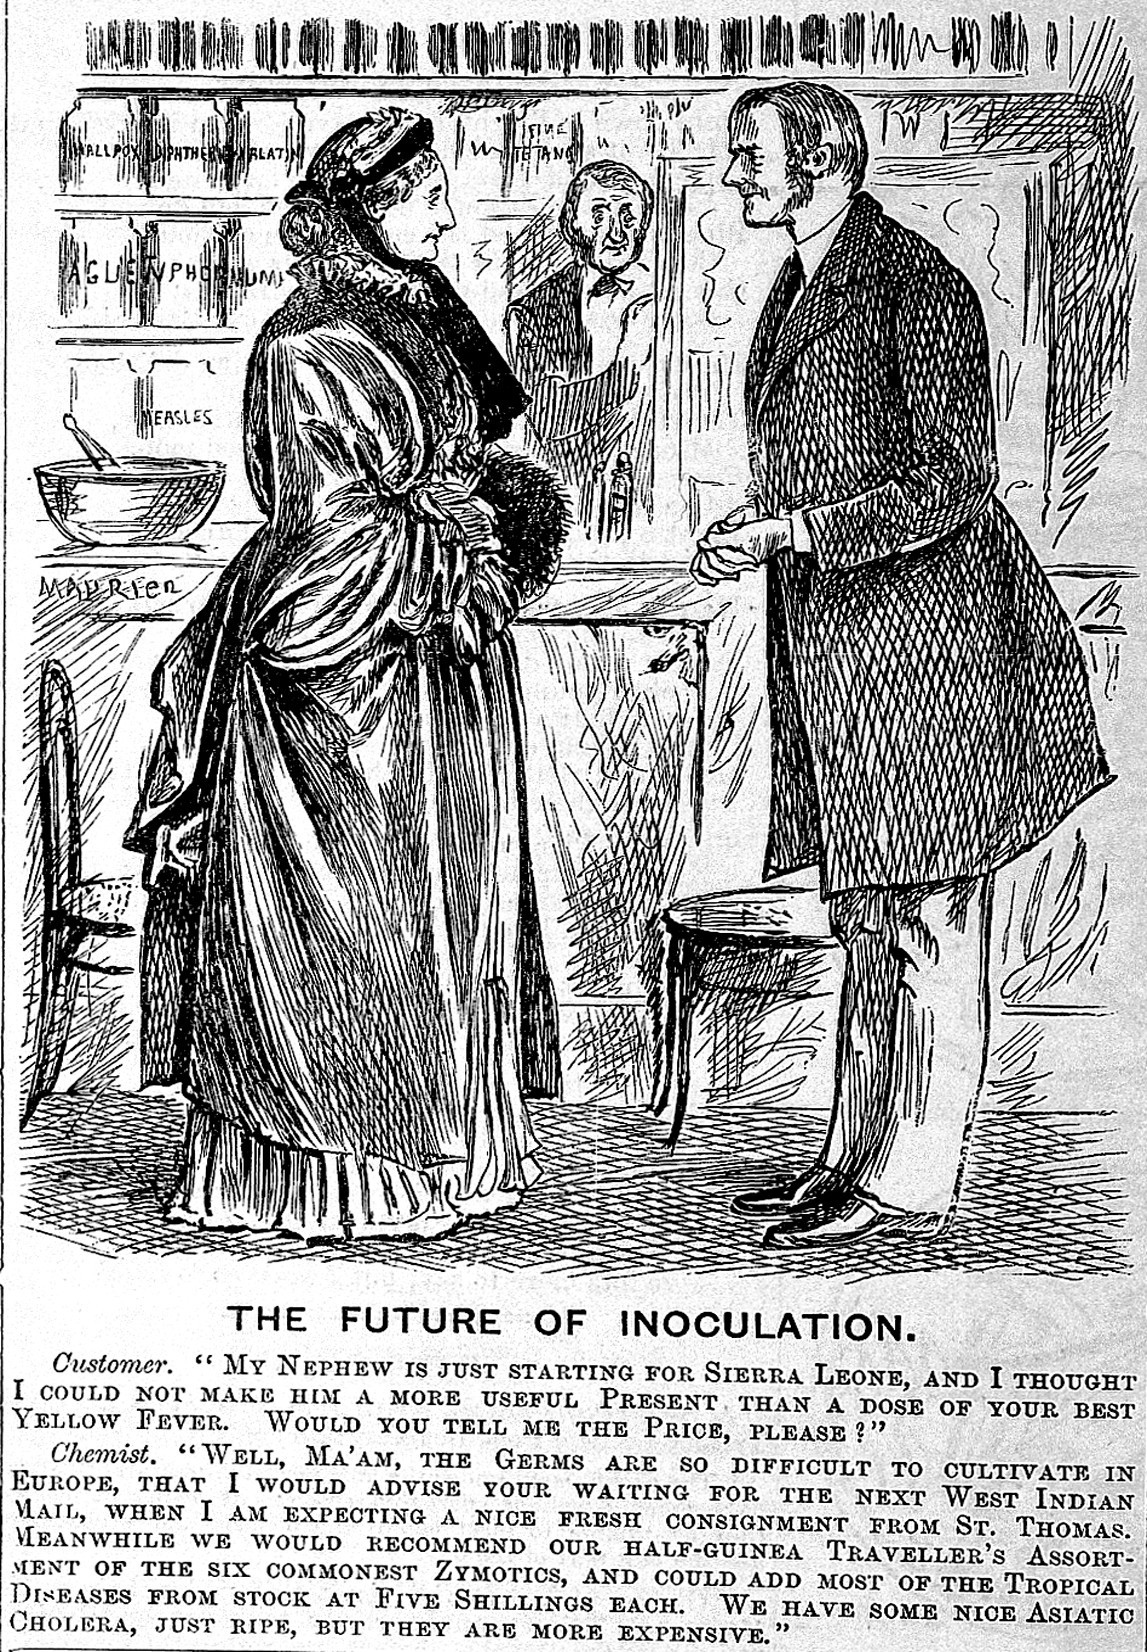 Image of monochrome ink sketch depicting a man and a woman at a shop